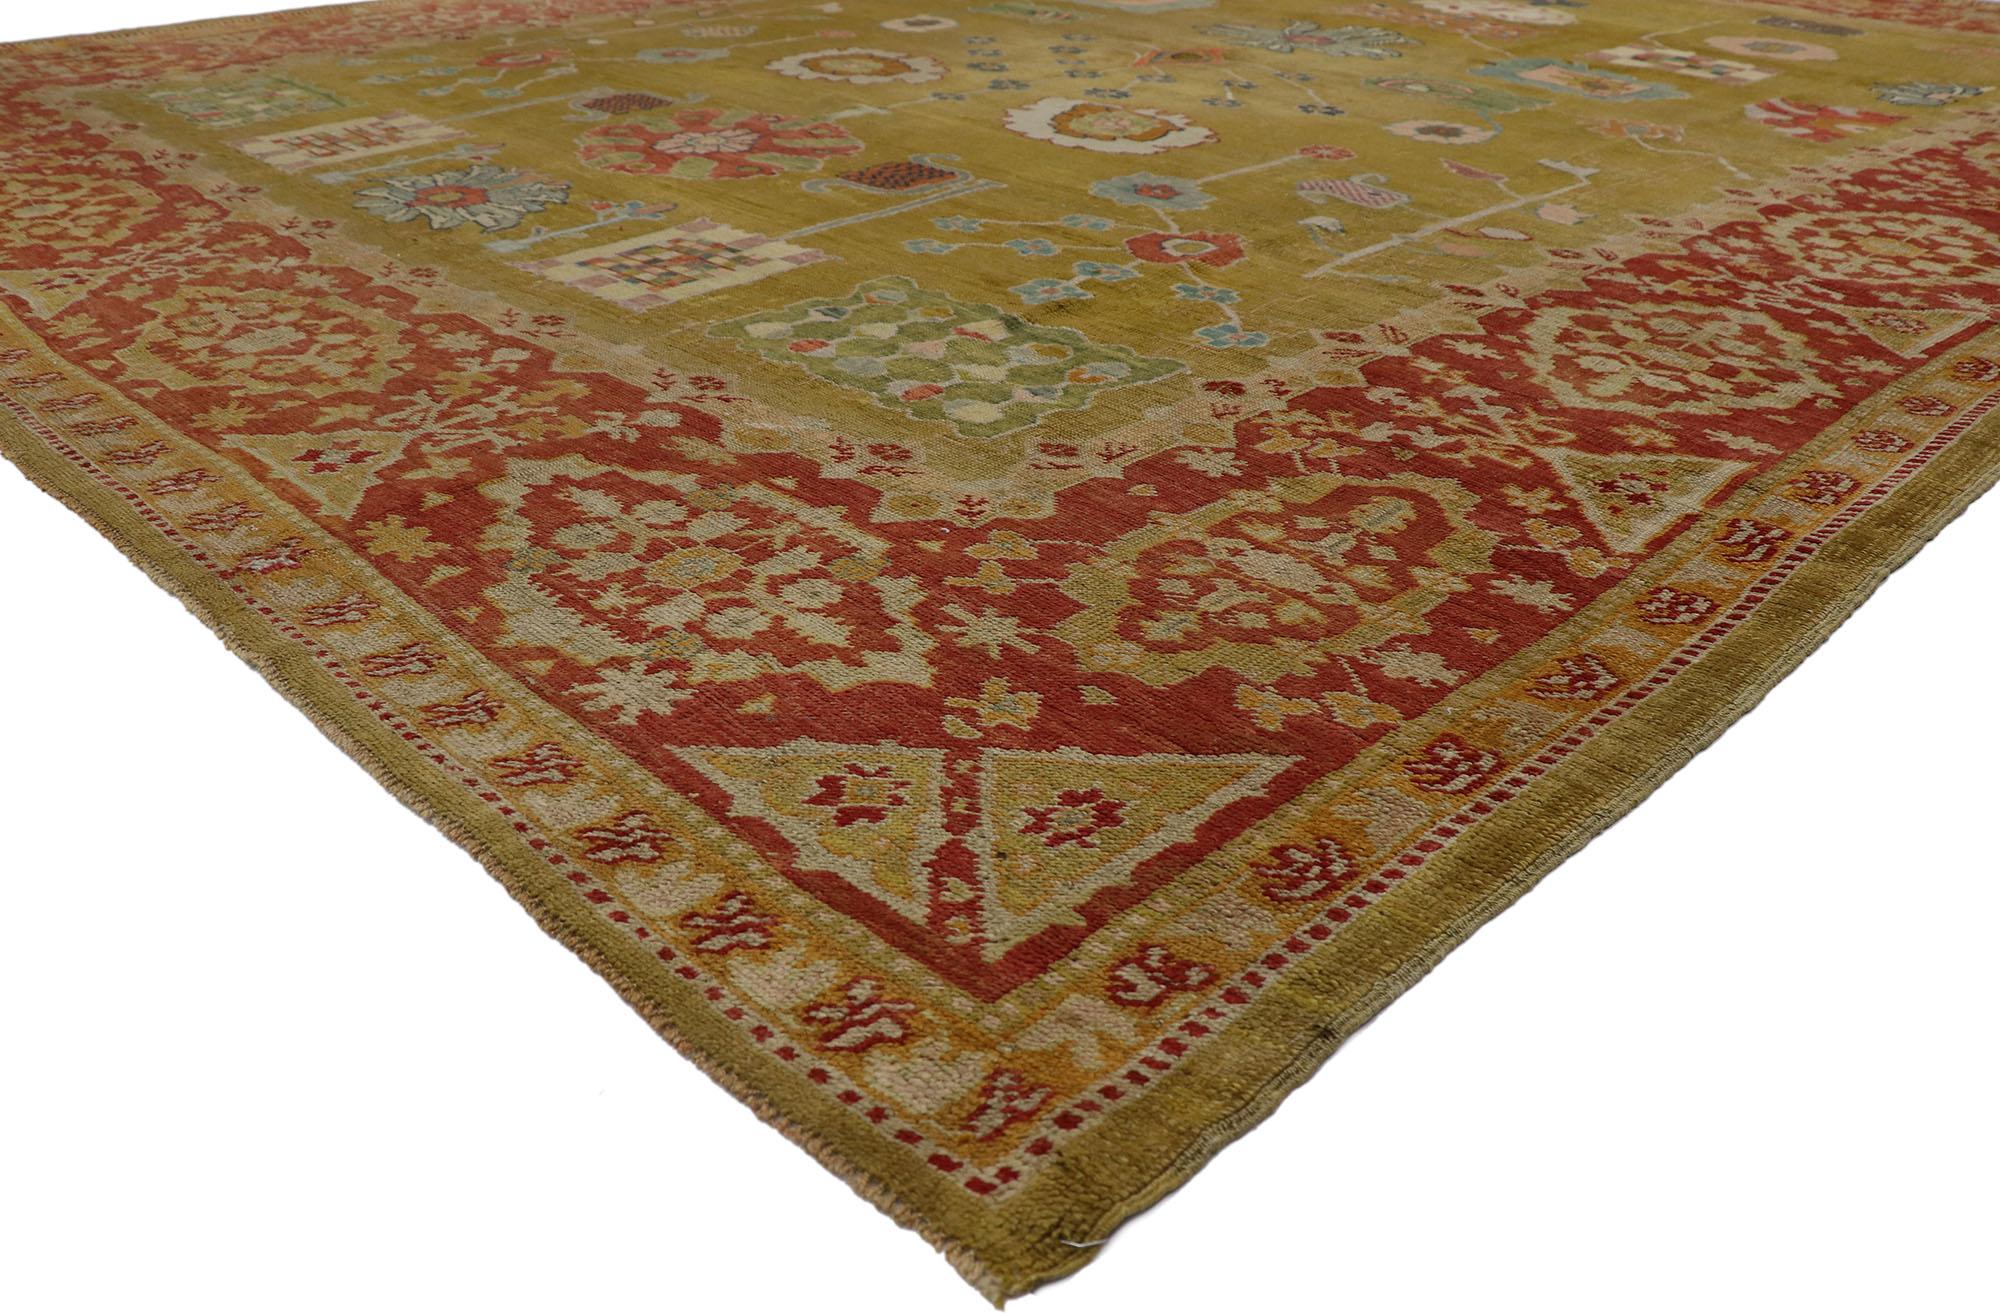 53576 Vintage Turkish Oushak rug with Arts & Crafts Style 11'07 x 14'11. With its timeless design and earth-tone colors, this hand-knotted wool vintage Turkish Oushak rug astounds with its beauty. The abrashed greenish-brownish field features an